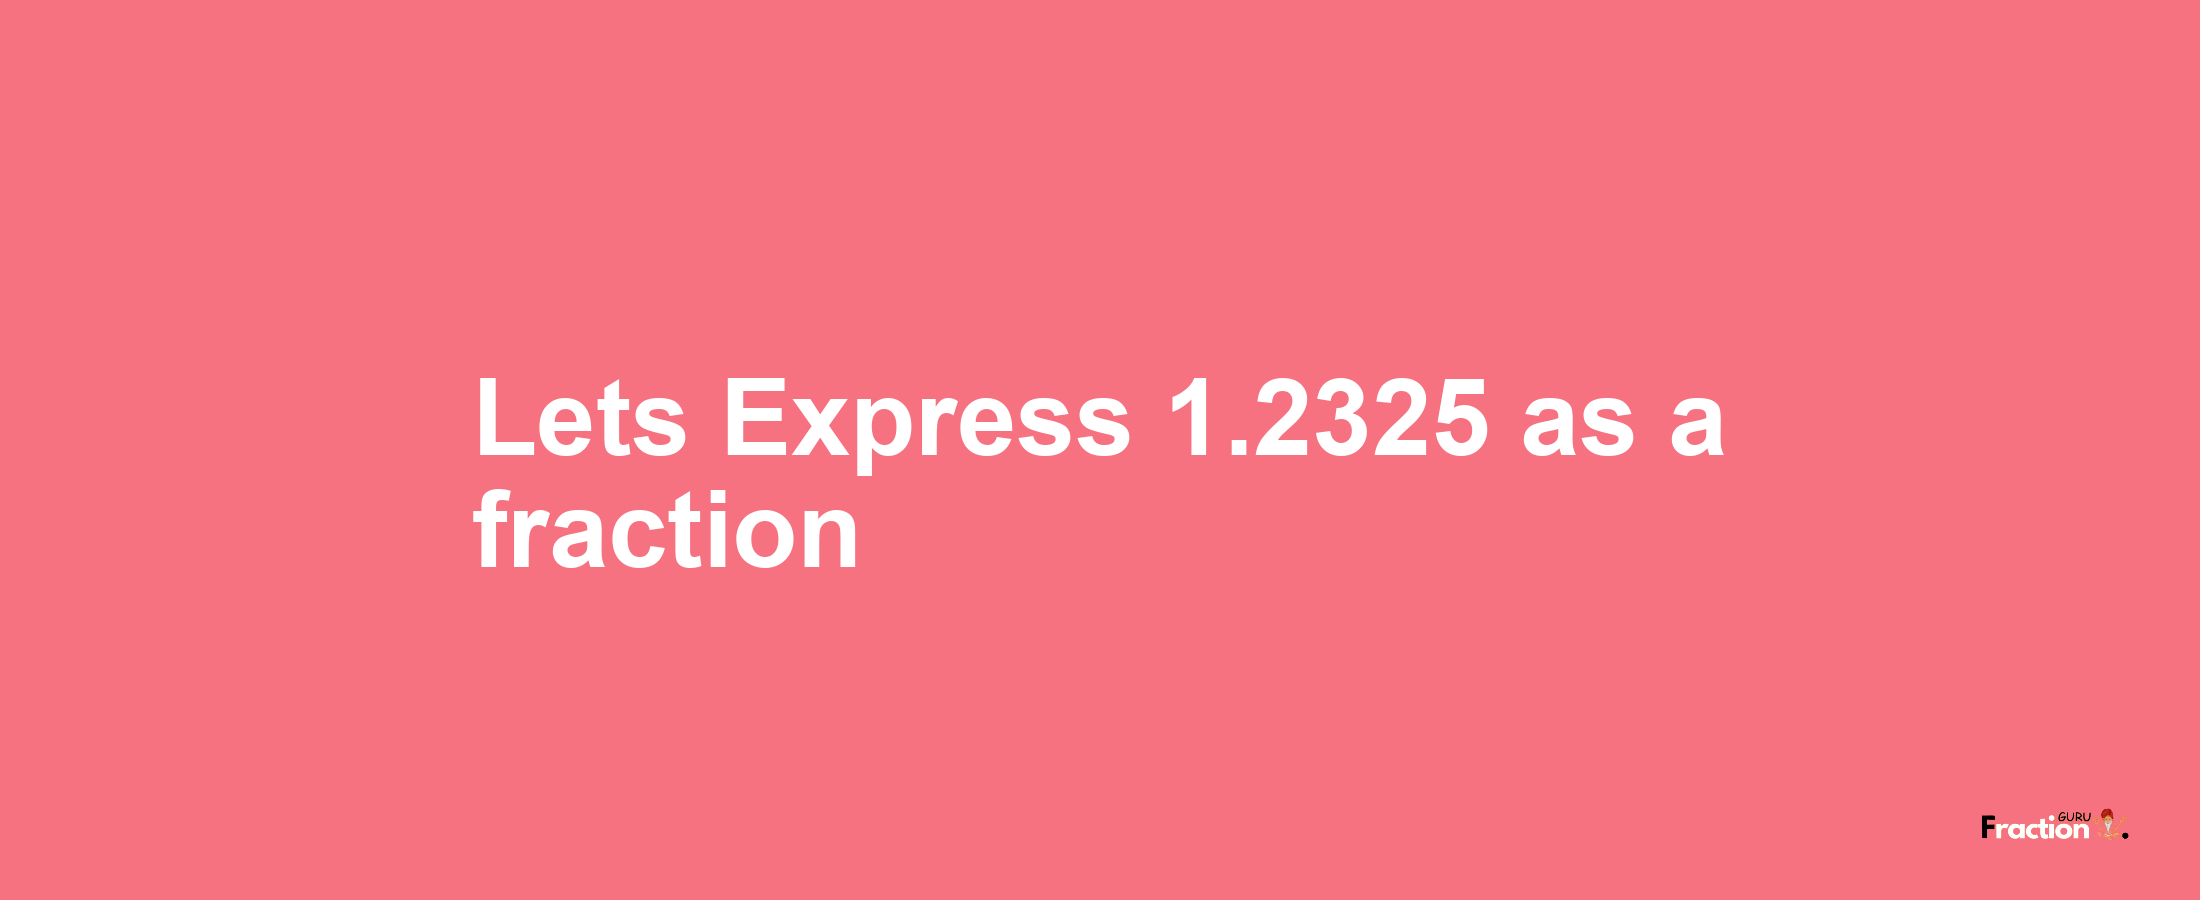 Lets Express 1.2325 as afraction